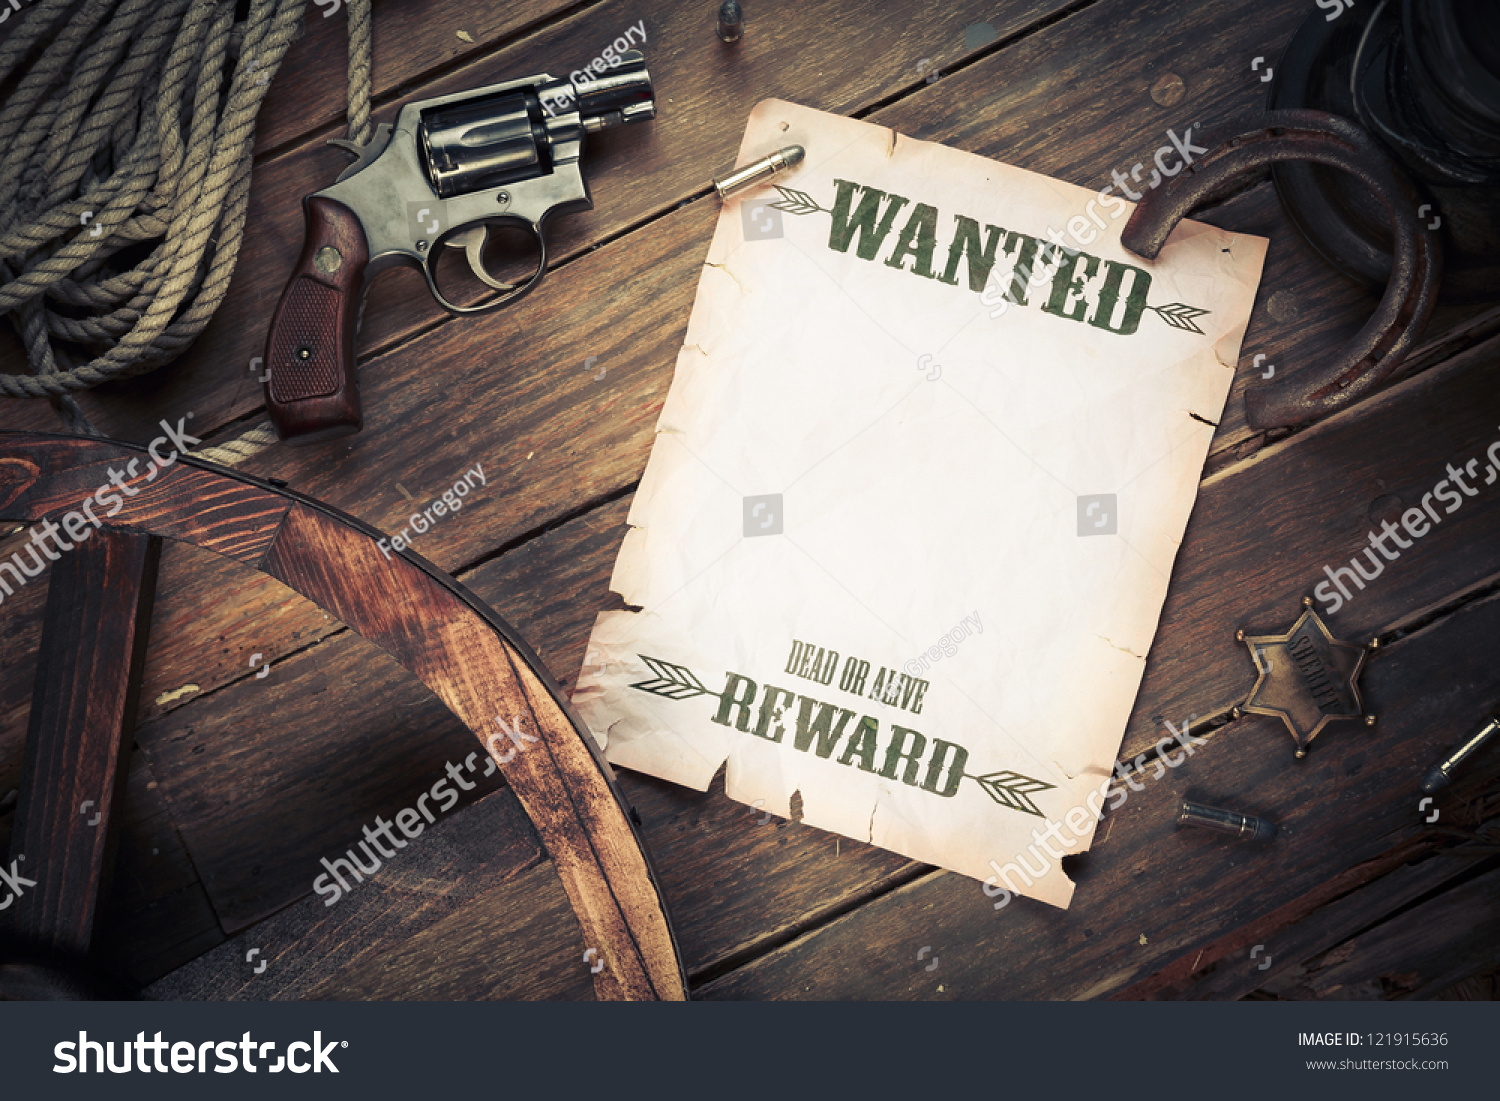 Old Western Background Wanted Poster Stock Photo 121915636 - Shutterstock1500 x 1101